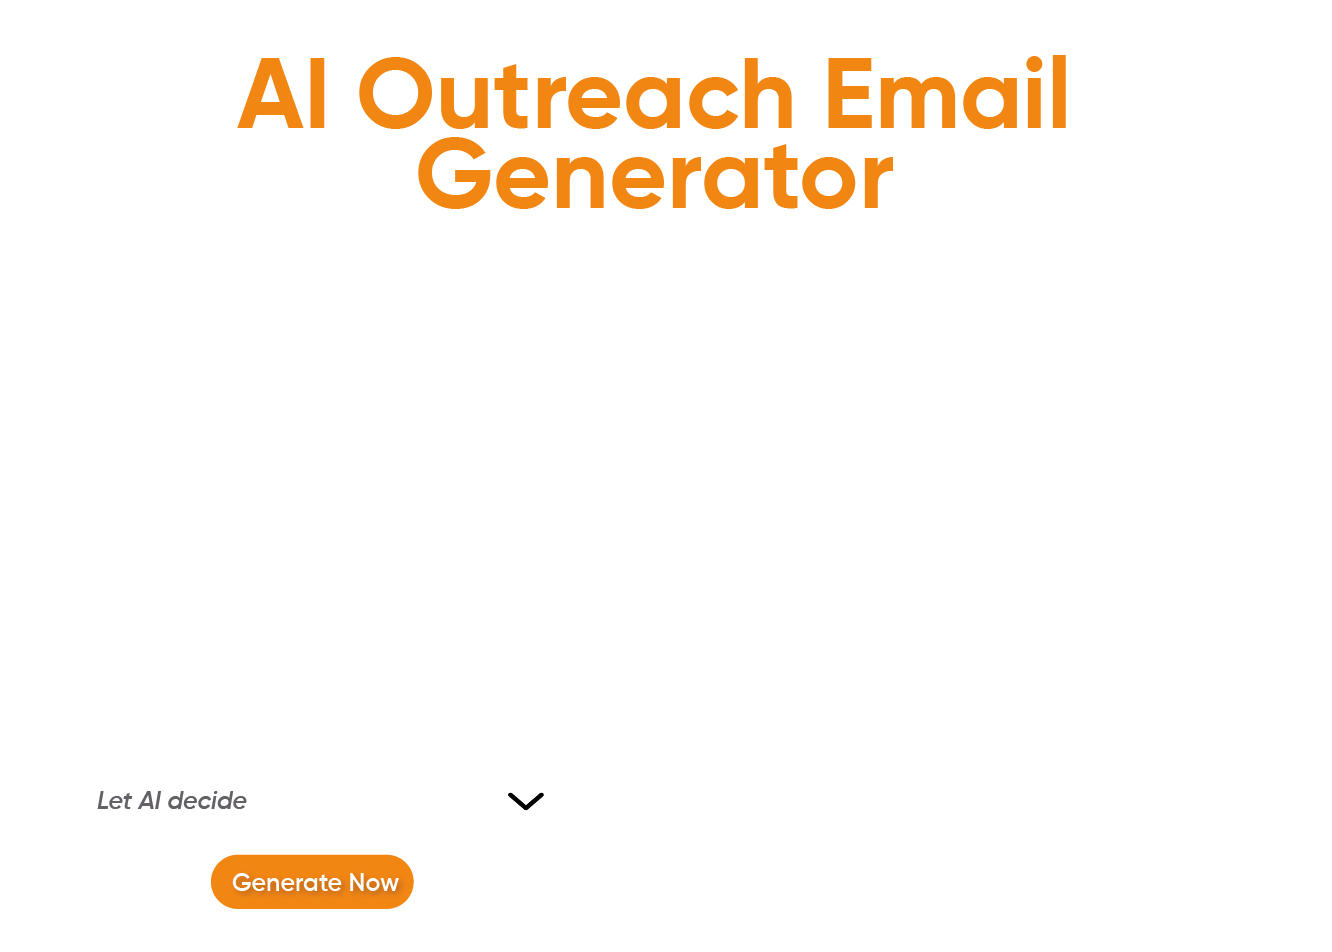 Increase Engagement Through AI Generate Outreach Email Tool